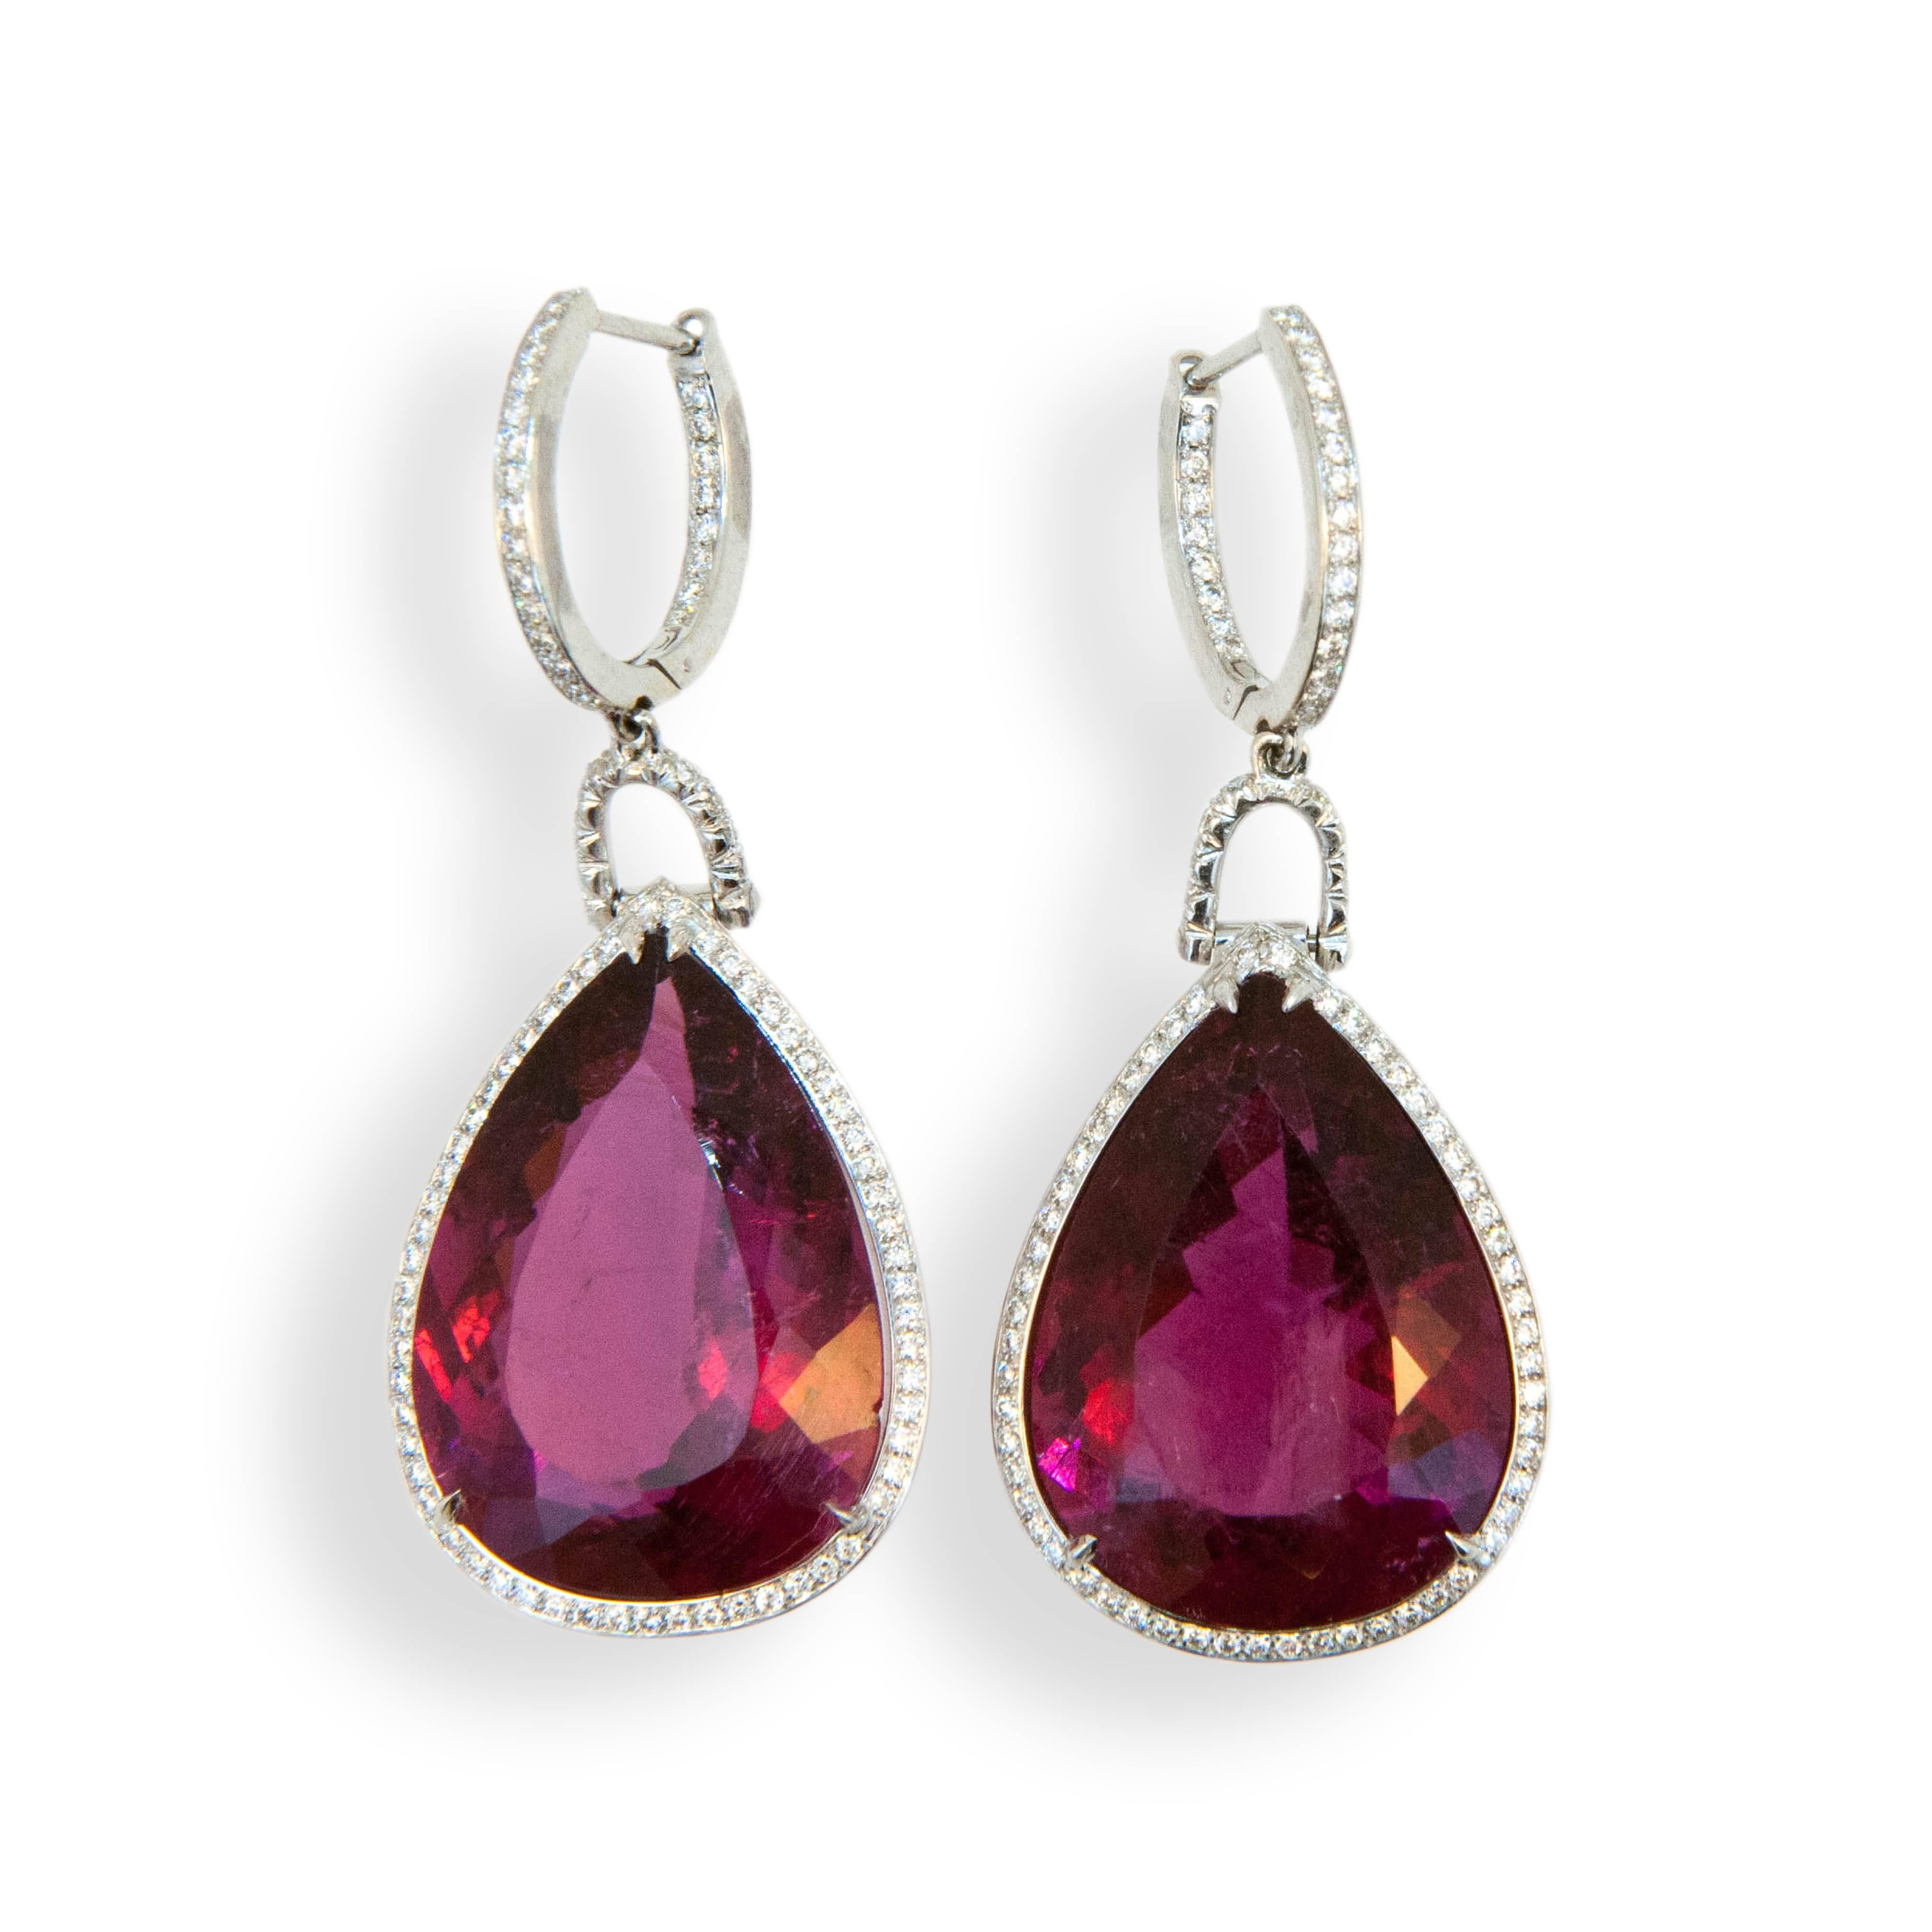 18 karat white gold earrings each set with one faceted pear shaped Rubellite Tourmaline 15.80 carats and 15.65 carats. Diamond hoop is set with (23) diamonds (46) total .19 carat total weight each connecting link is set with (8) diamonds (16) total